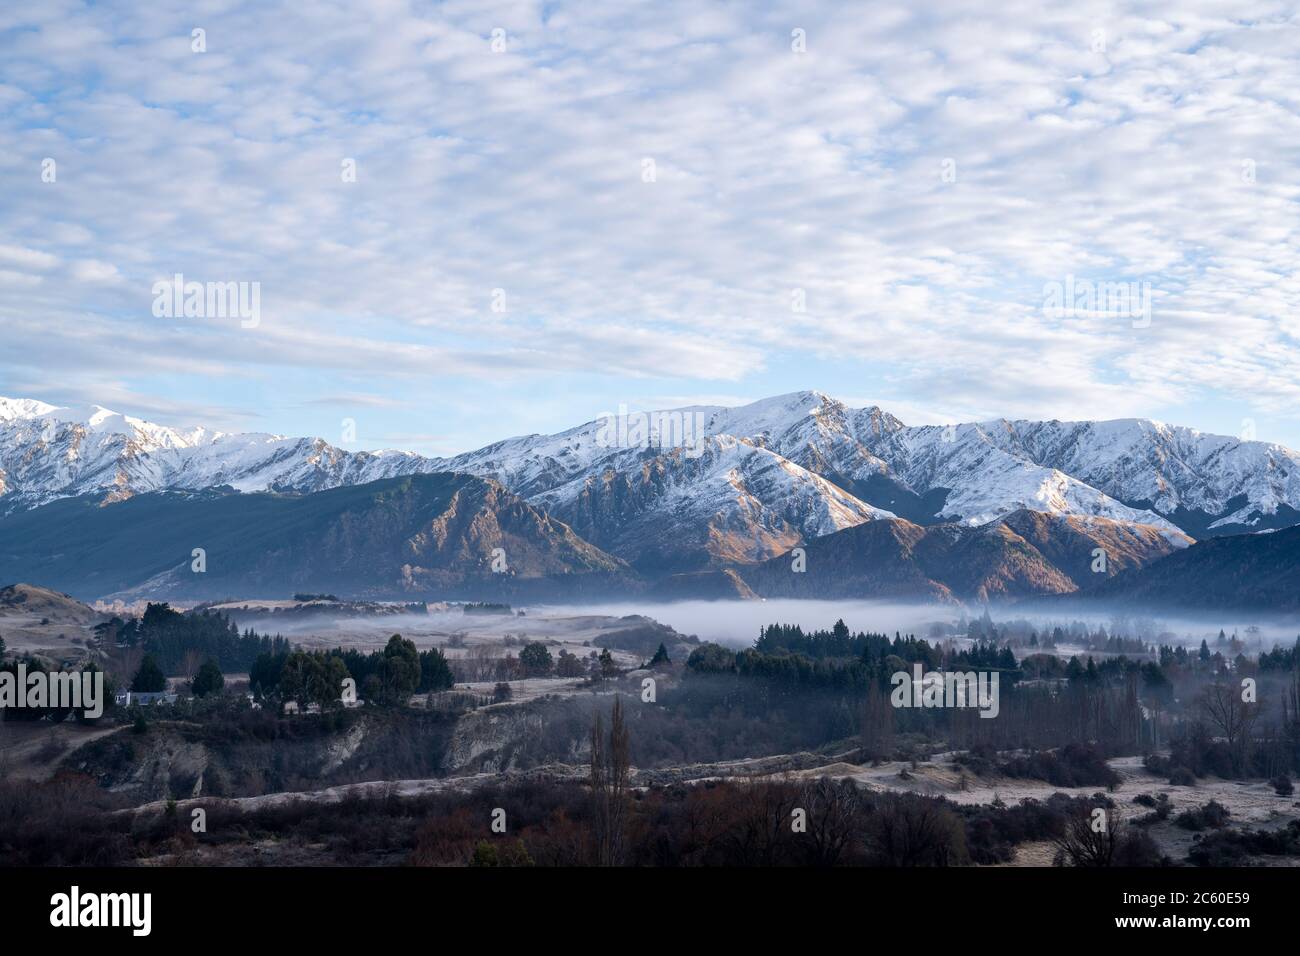 Panorama of Snow Mountain Range Landscape with Blue Sky background from New Zealand. Stock Photo